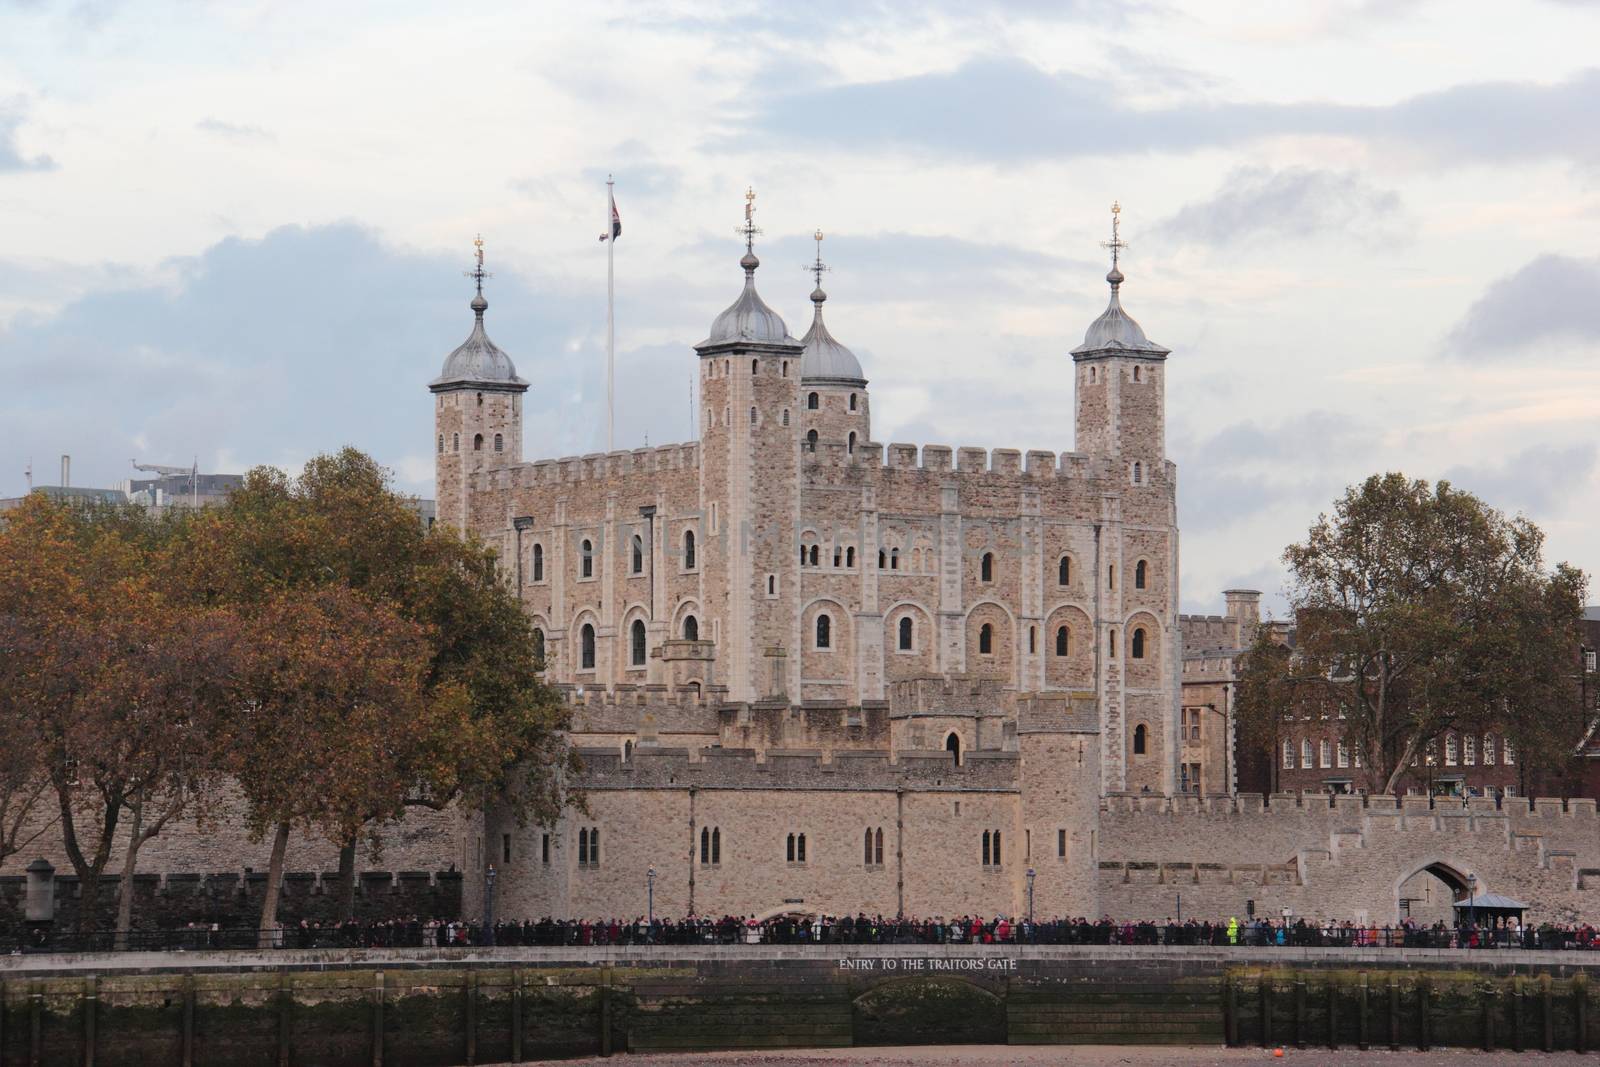 Tower of London London UK by mitzy